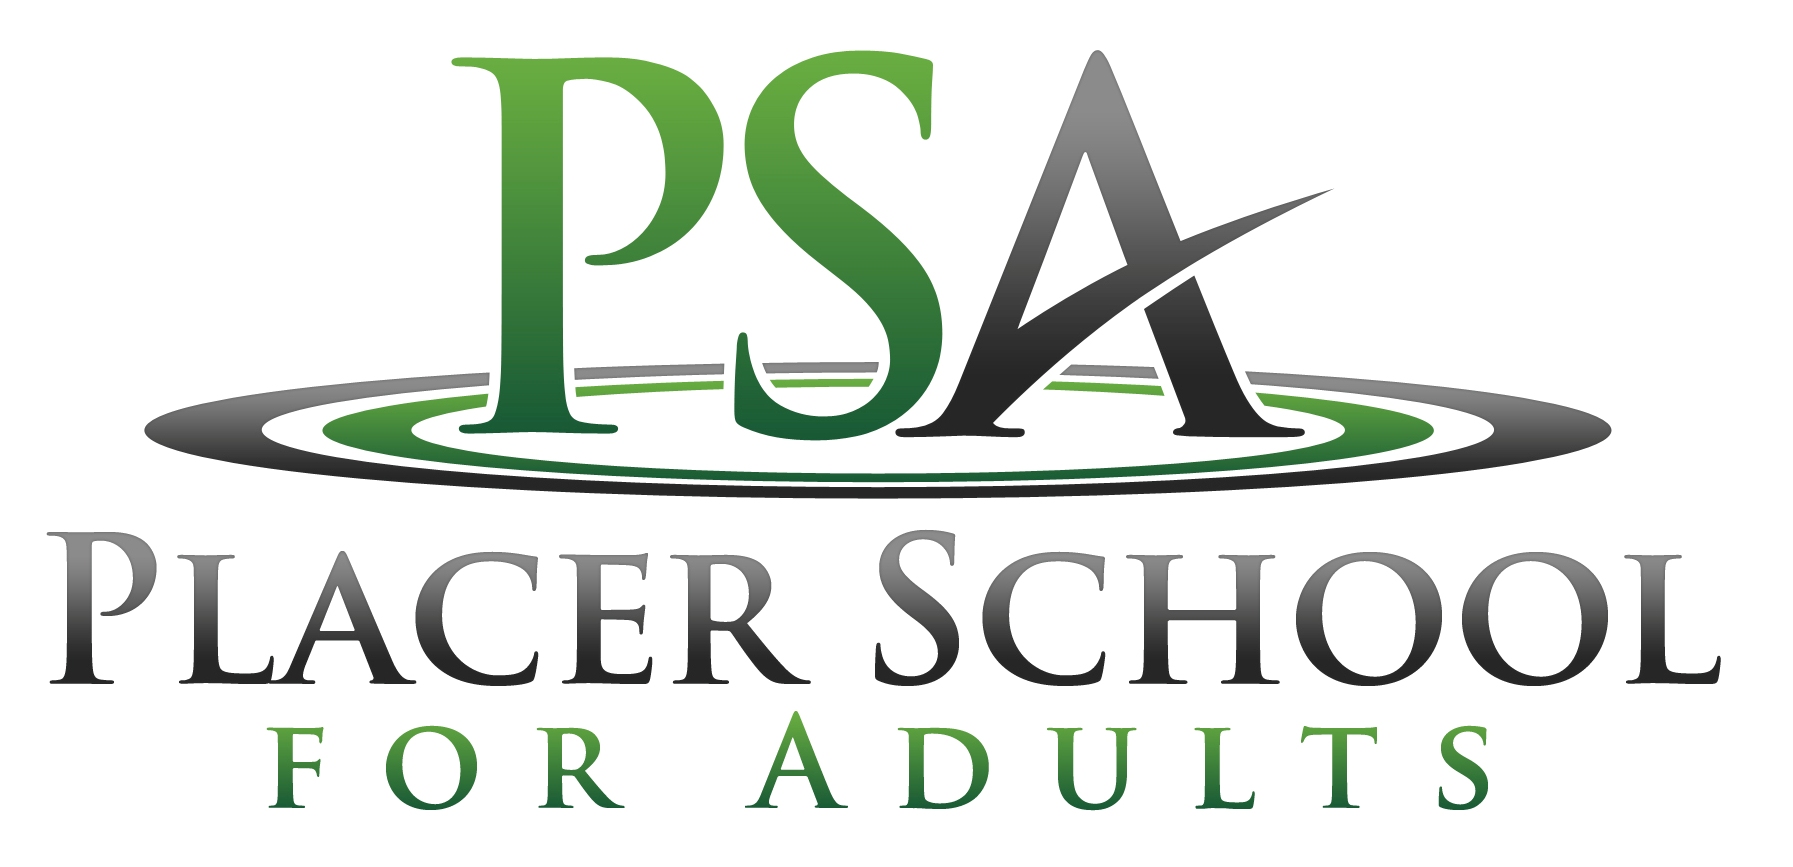 Placer School for Adults logo